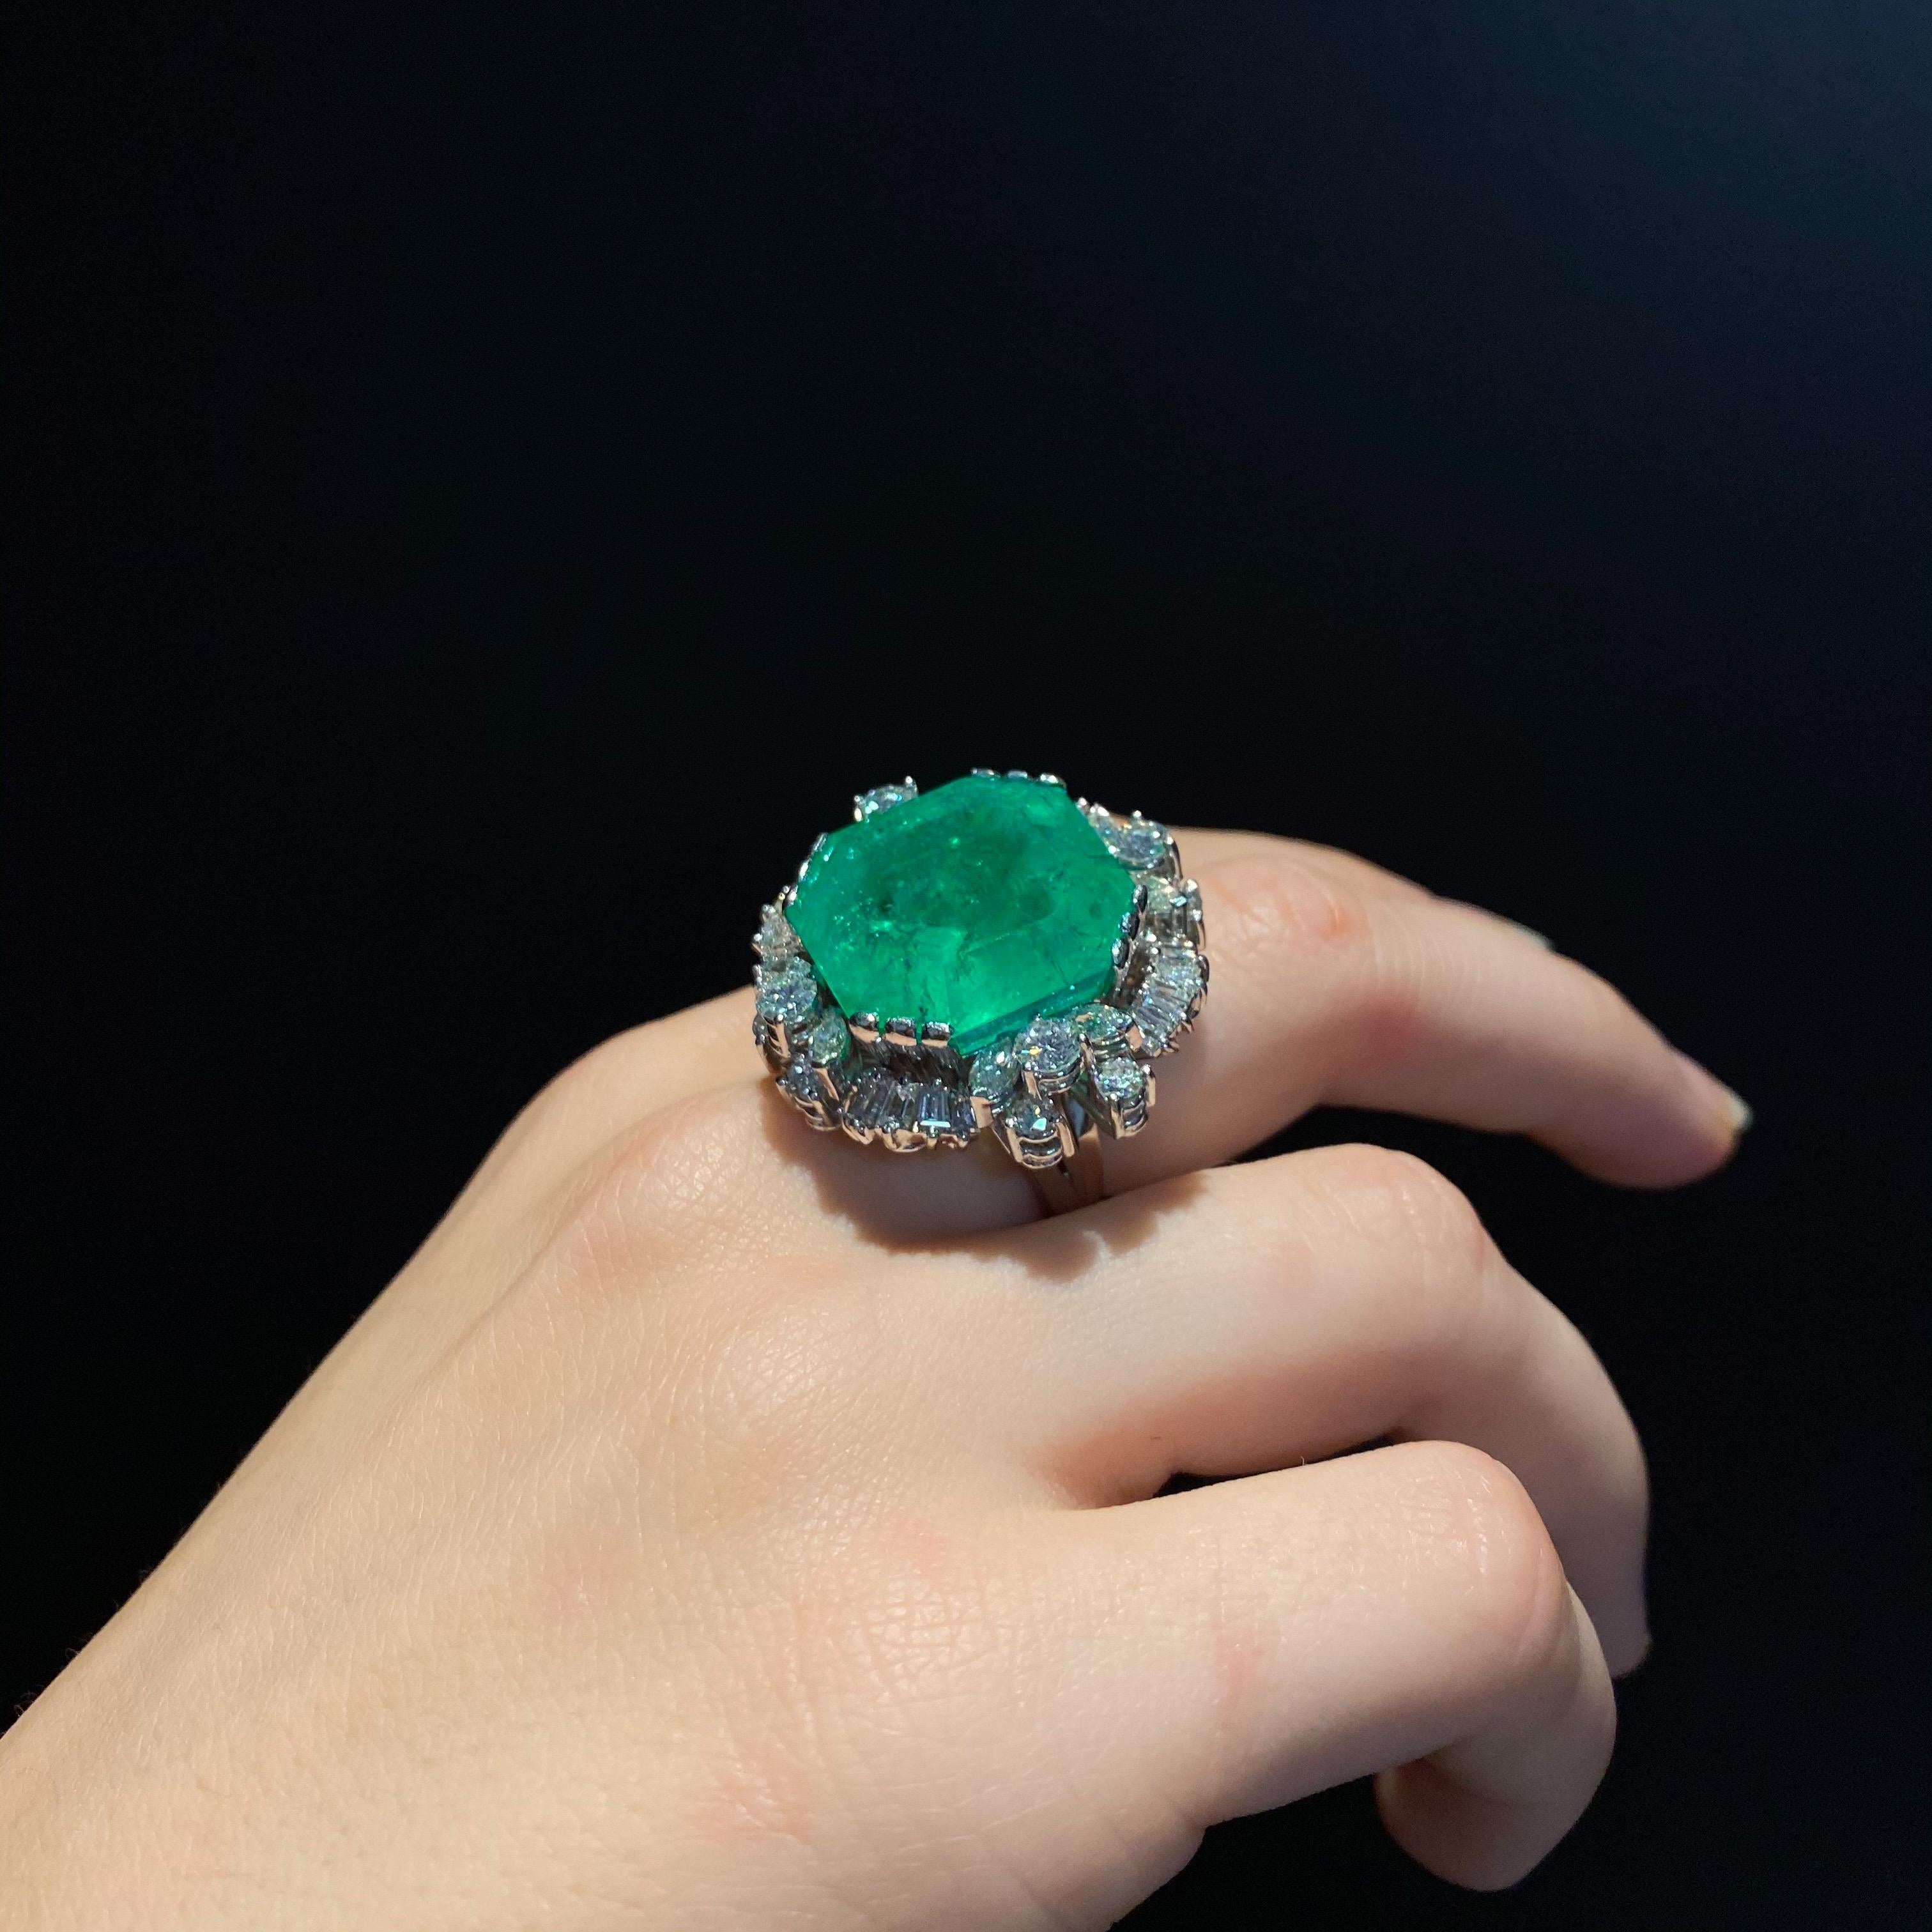 Women's Certified 37.50 Carat Colombian Emerald Diamond Cocktail Ring White Gold